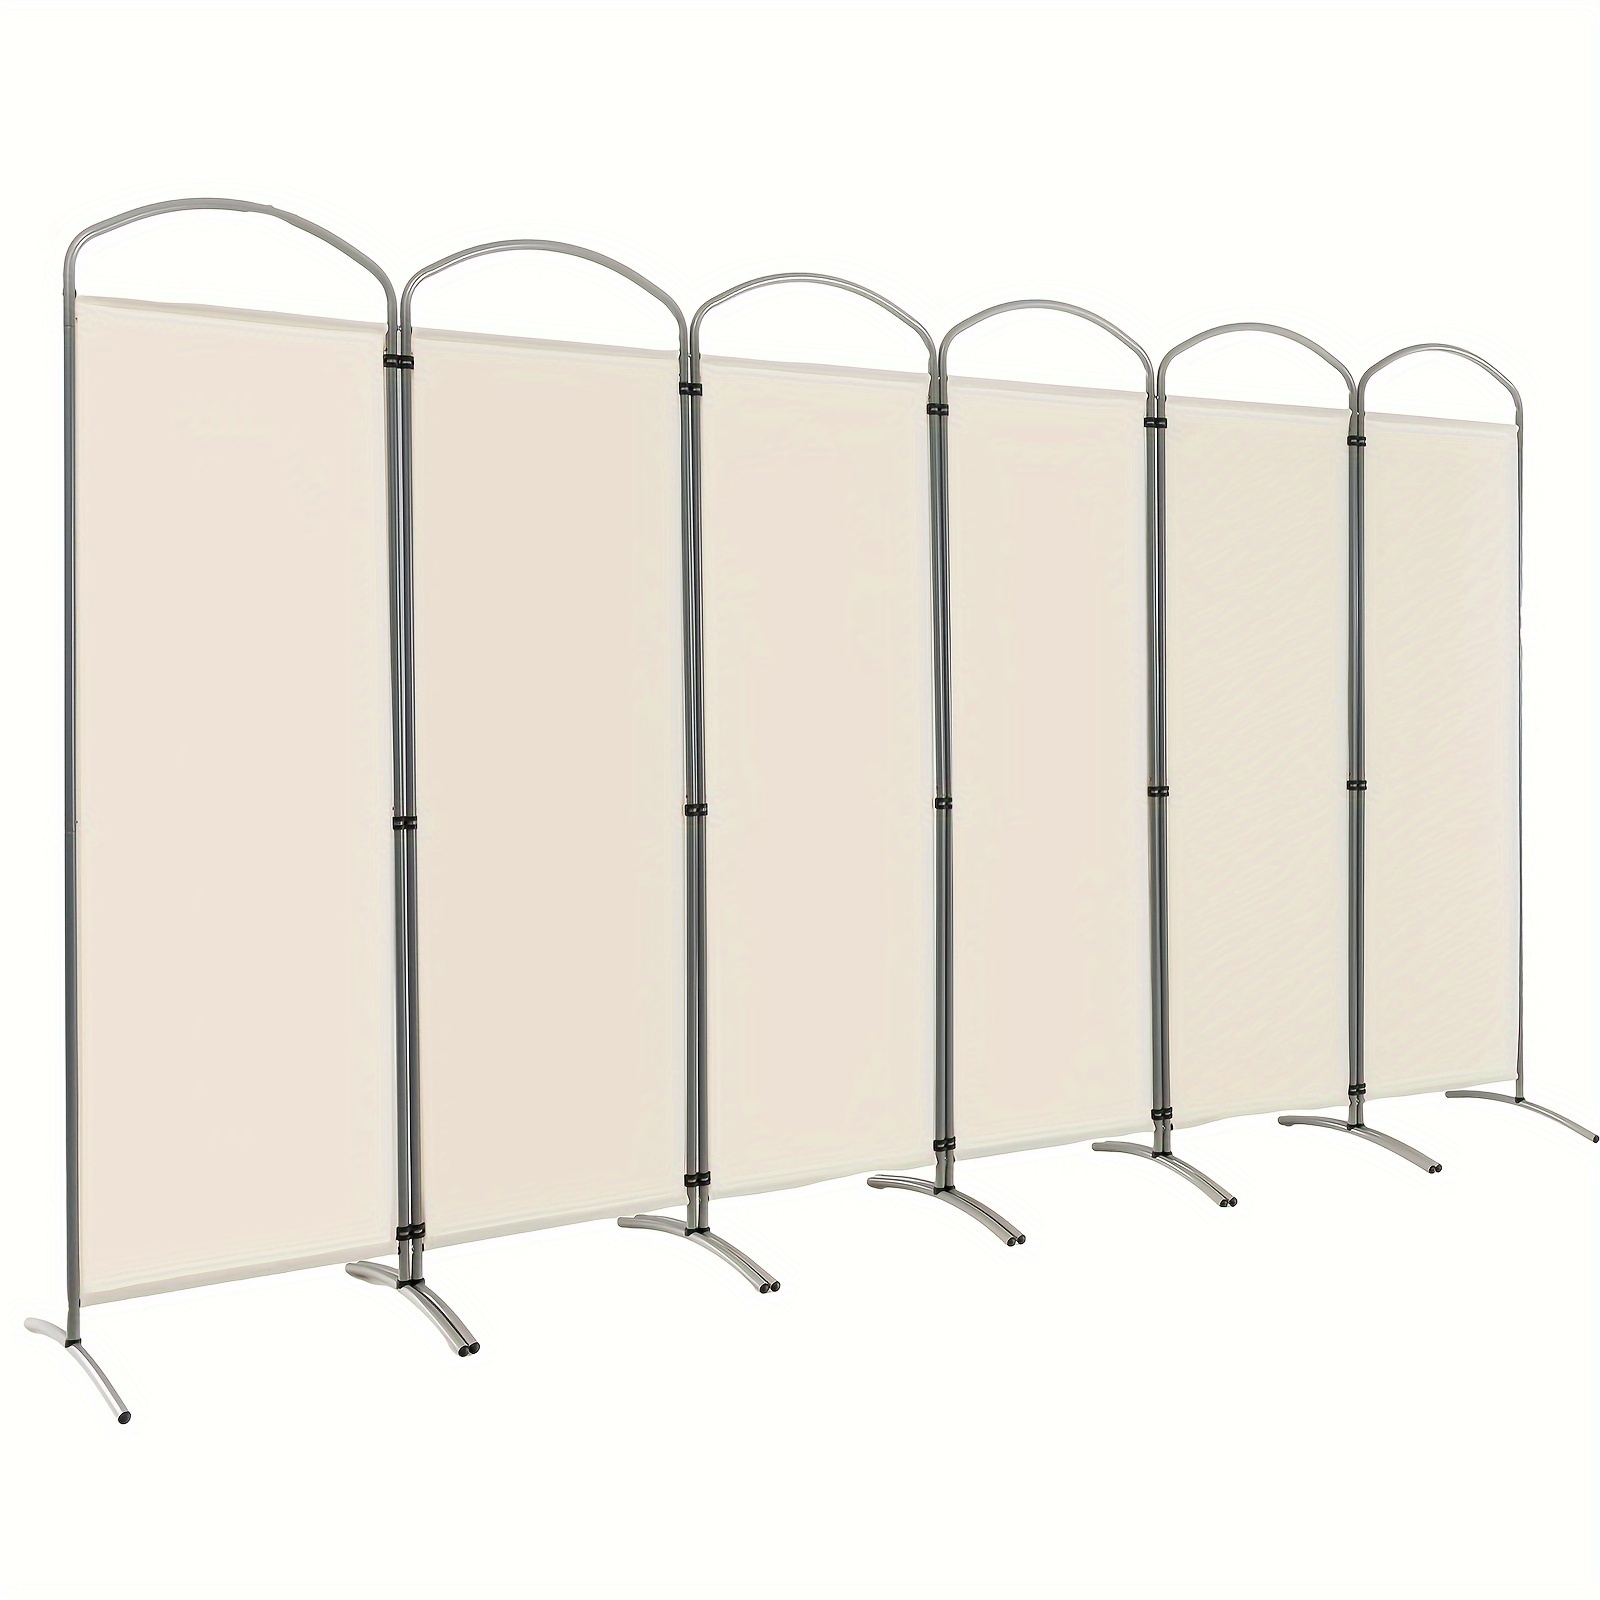 

6 Panels Folding Privacy Screen 6 Ft Tall Fabric Privacy Screen For Home White